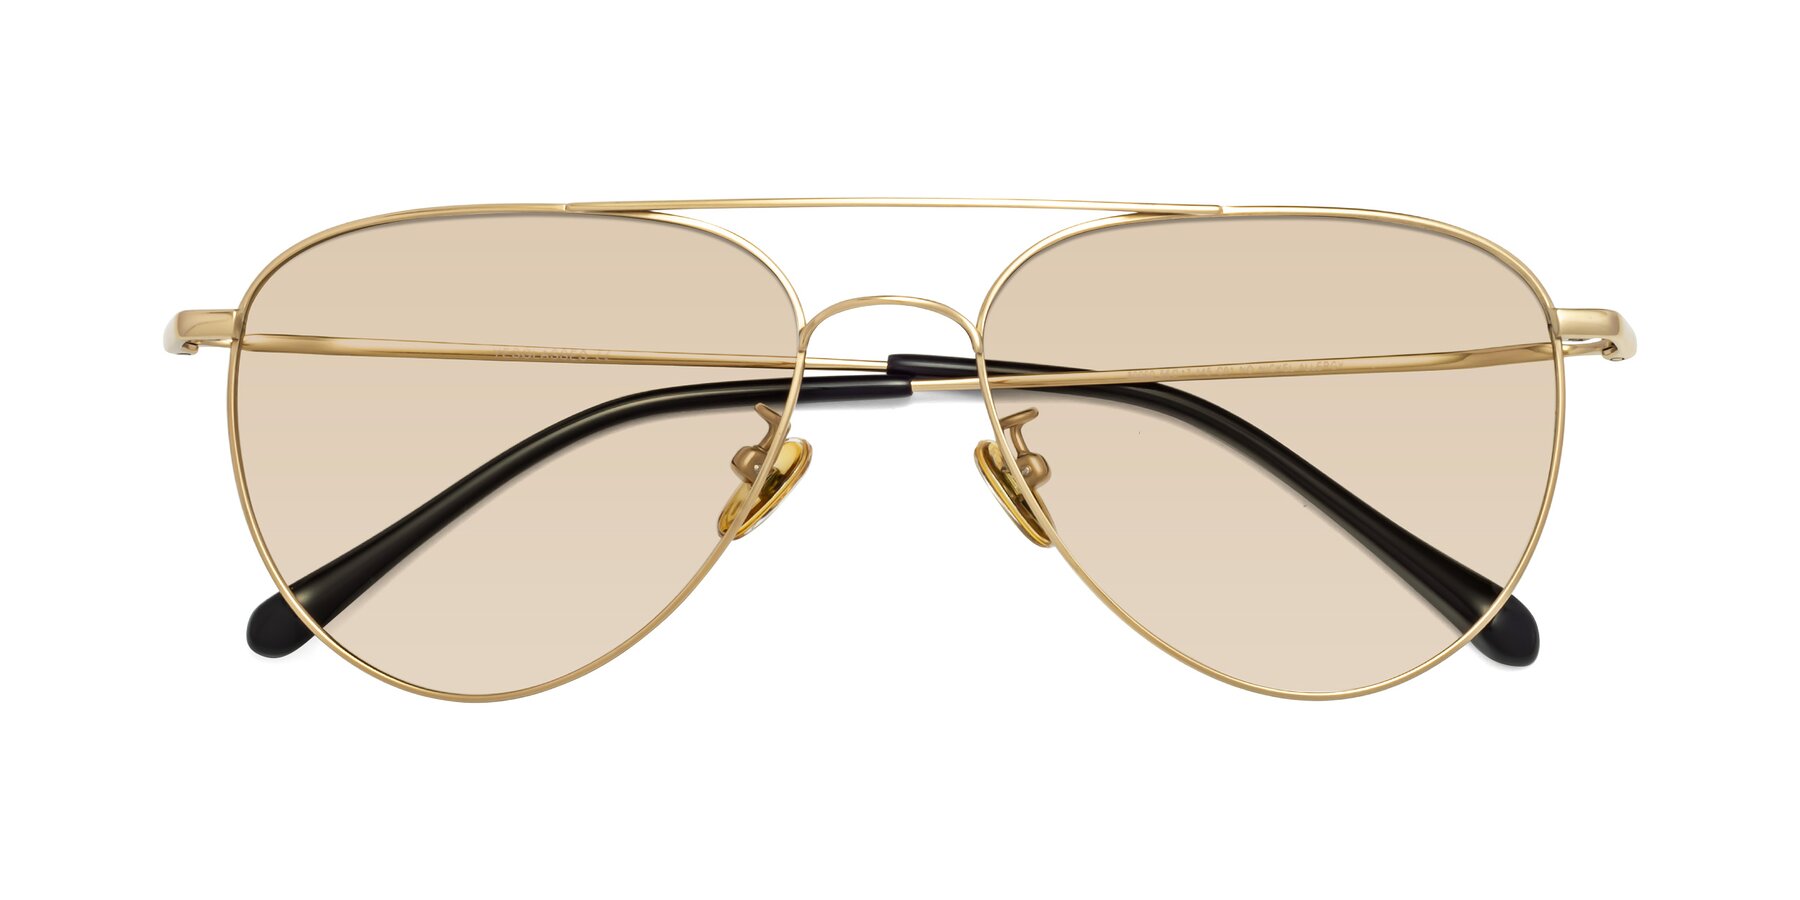 SunKissed Aviator Gold frame with Polarized Blue Chrome lenses -  MetalSunglasses